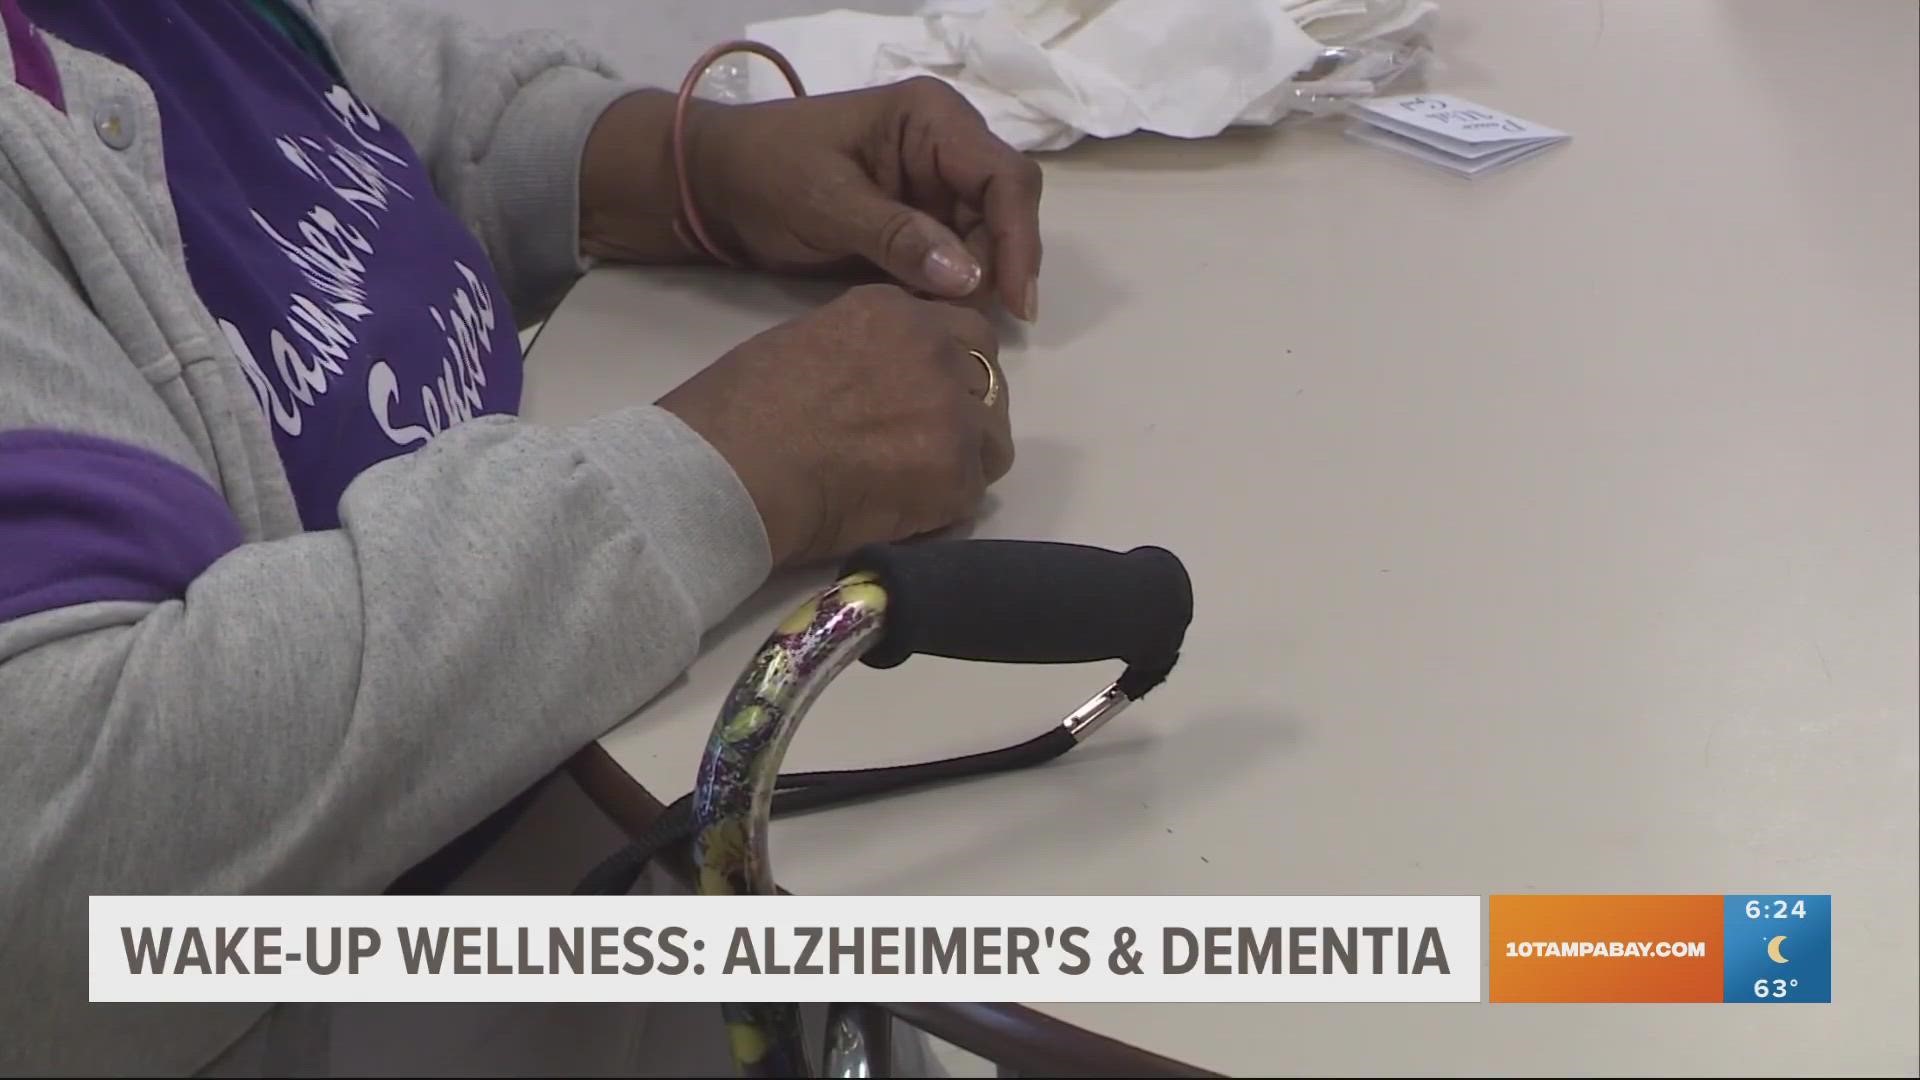 Researchers need people from every race, between the ages of 55 to 80, who don’t have symptoms of dementia.